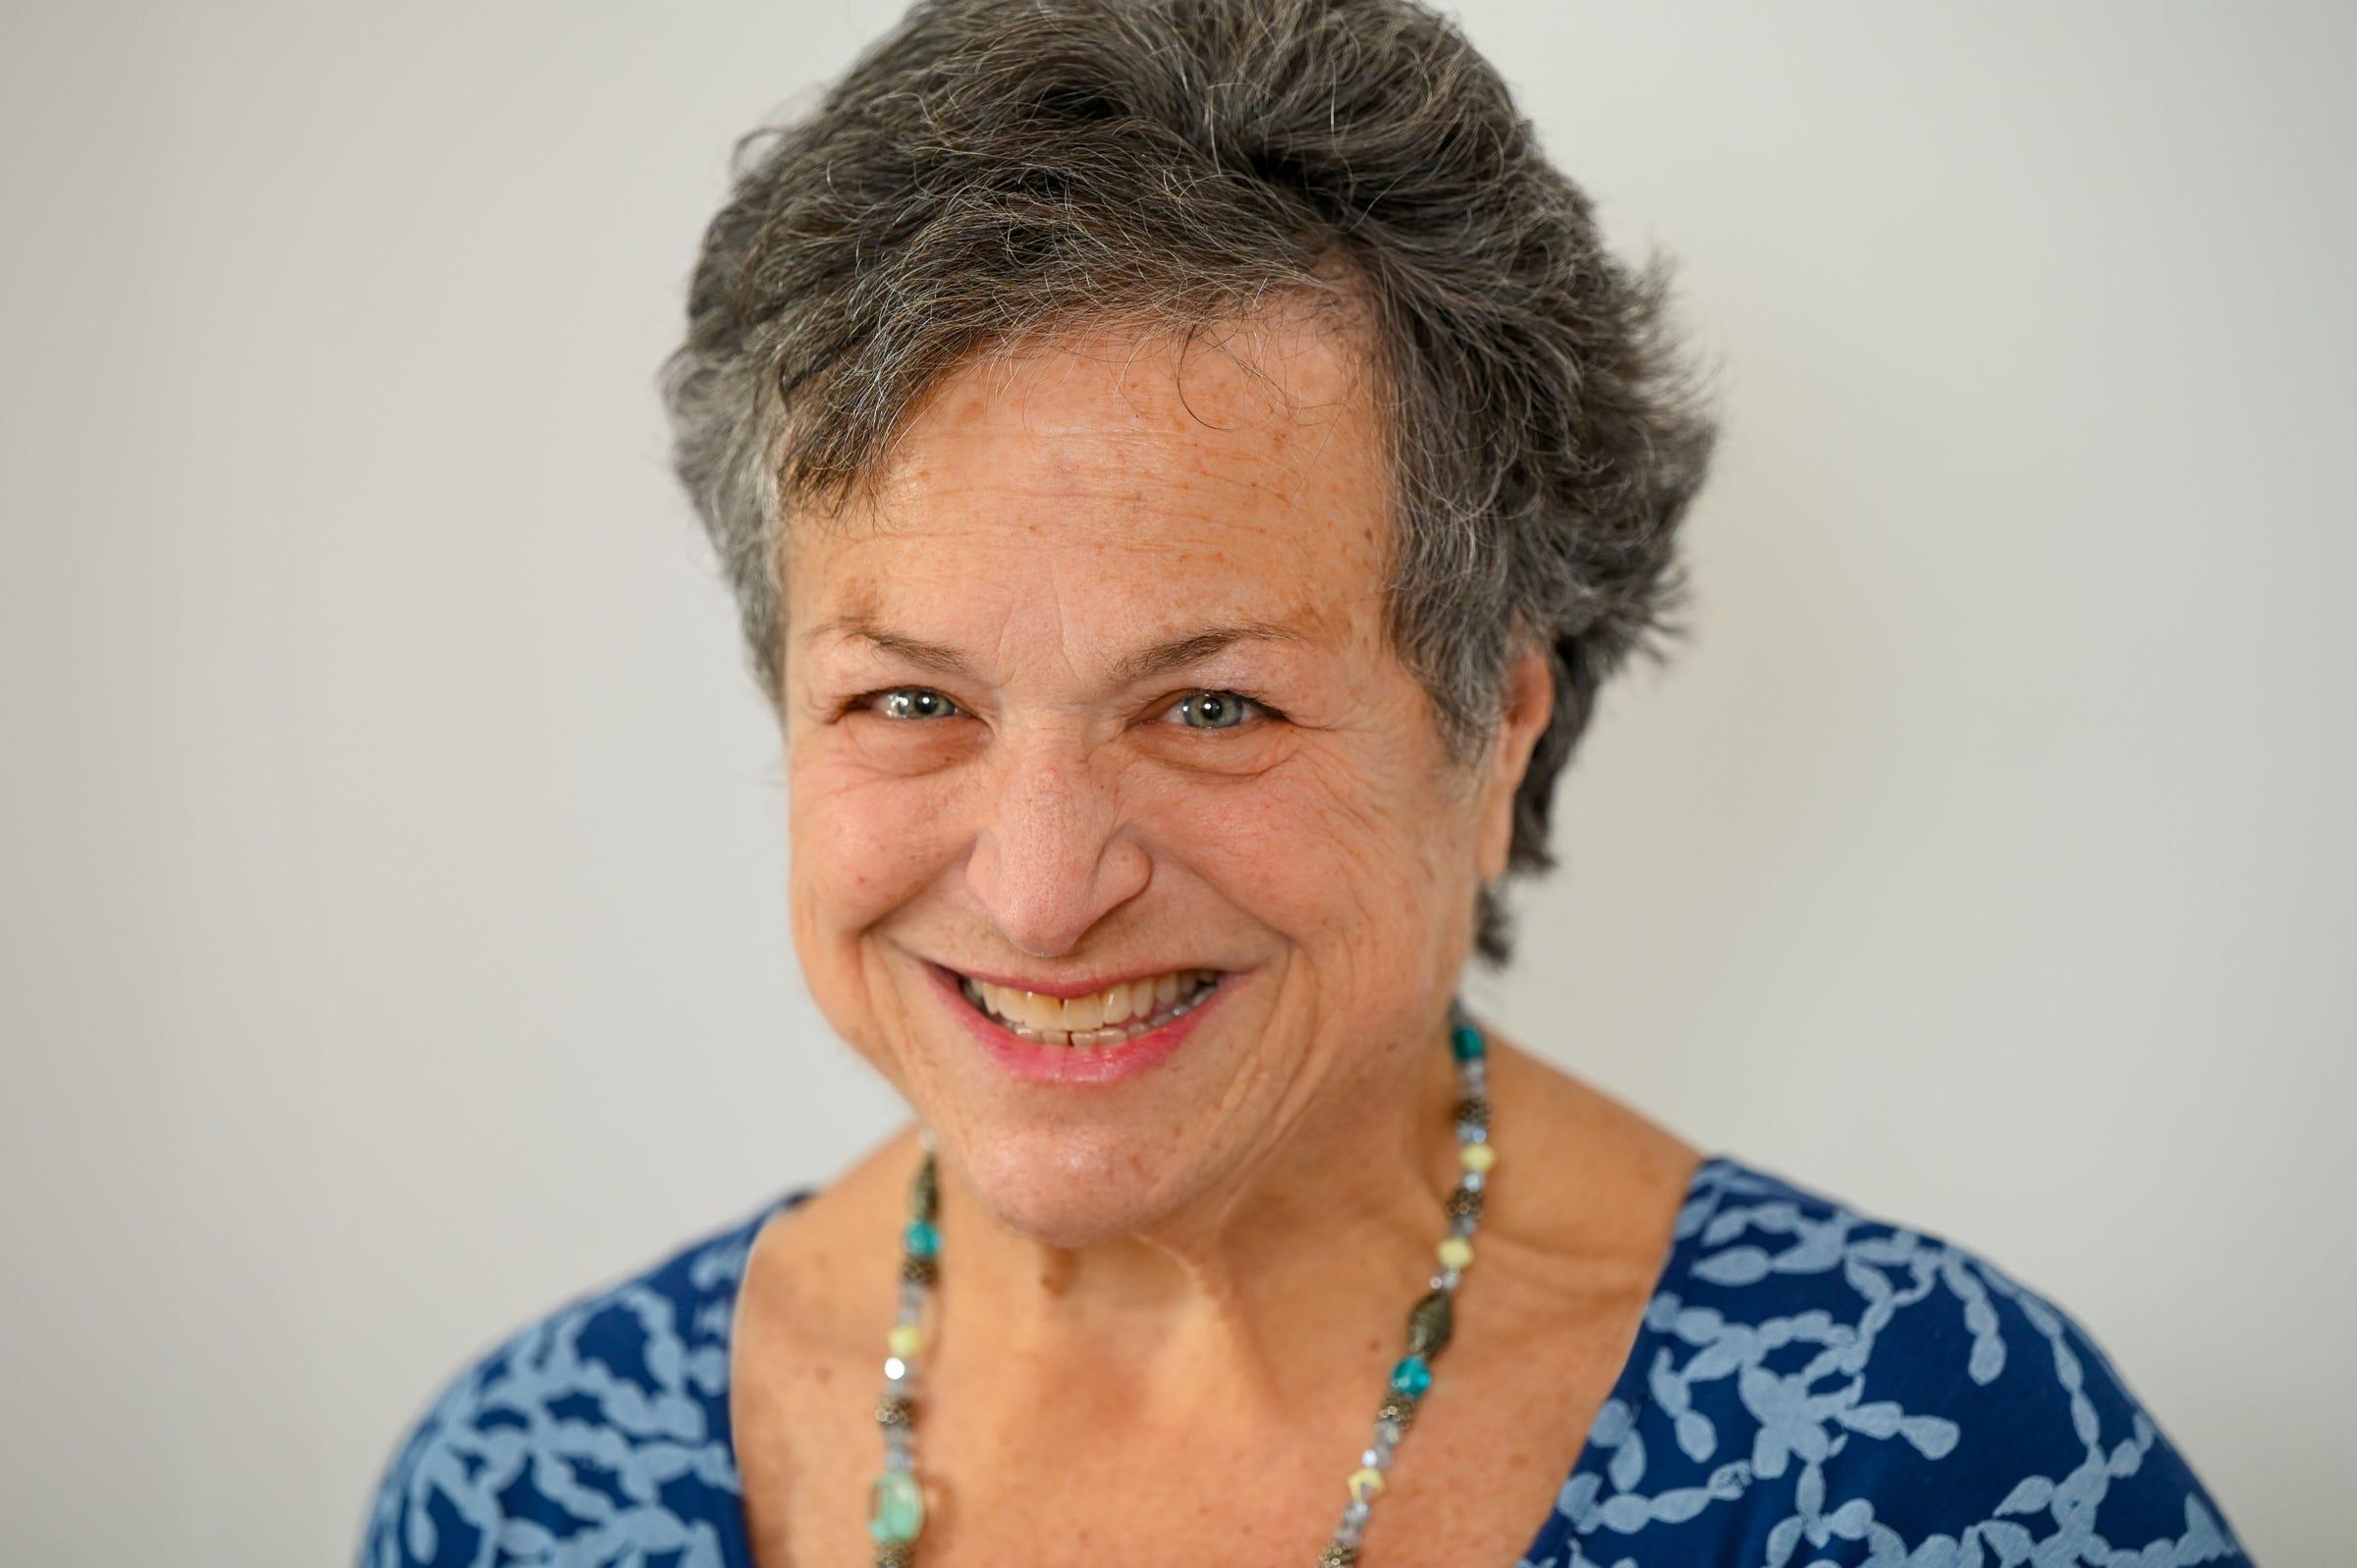 Reach Ina Resnikoff, the Swampscott Reporter’s weekly columnist, at inar@rcn.com.